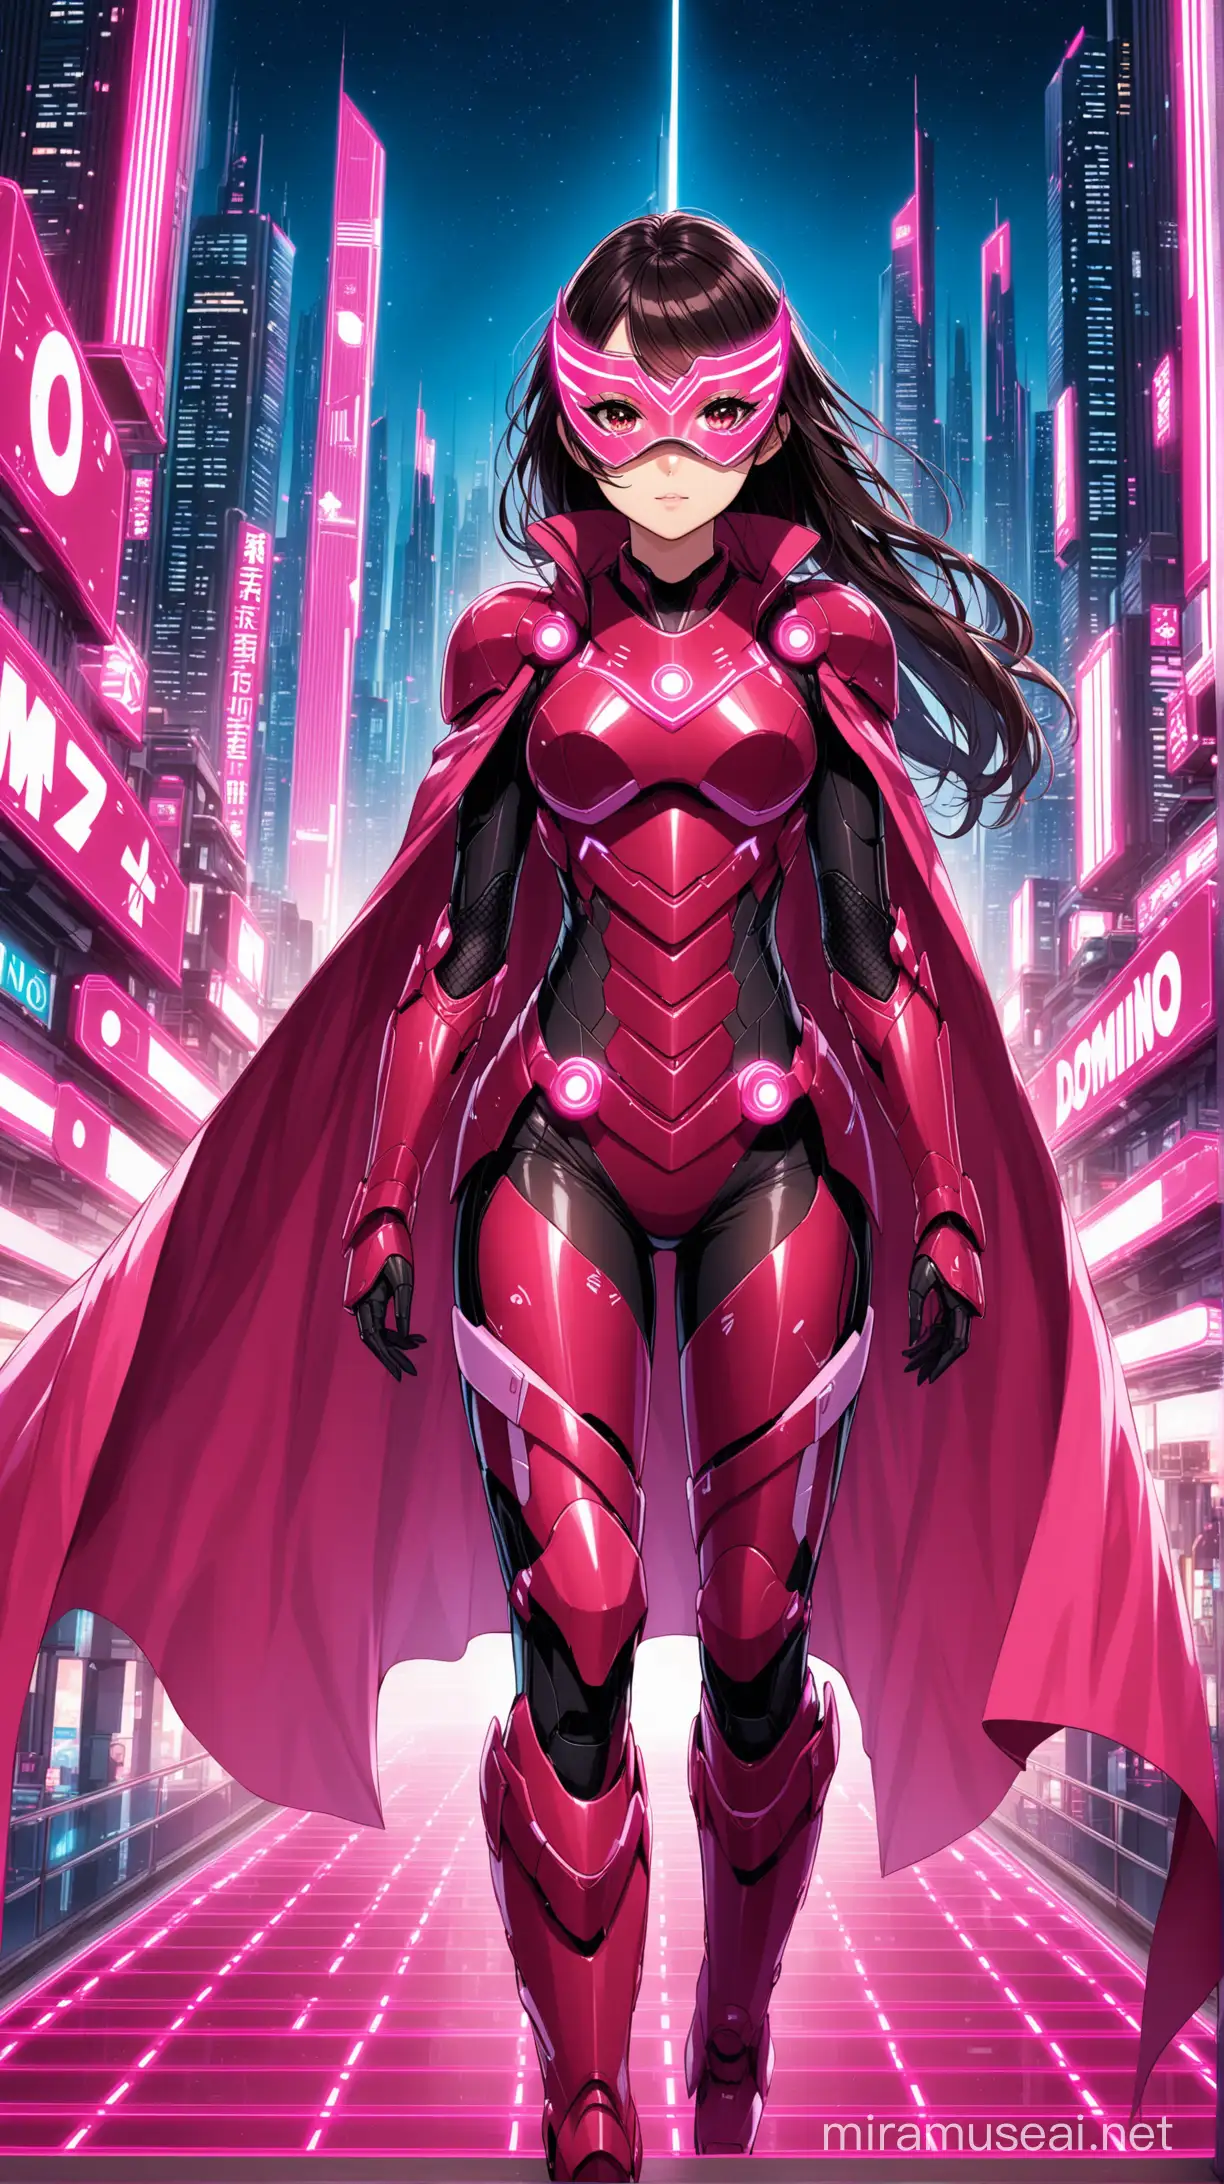 an attractive young woman, dark hair, crimson eyes, wearing crimson and pink futuristic armour, pink domino mask, pink cape, standing in a futuristic city, at night